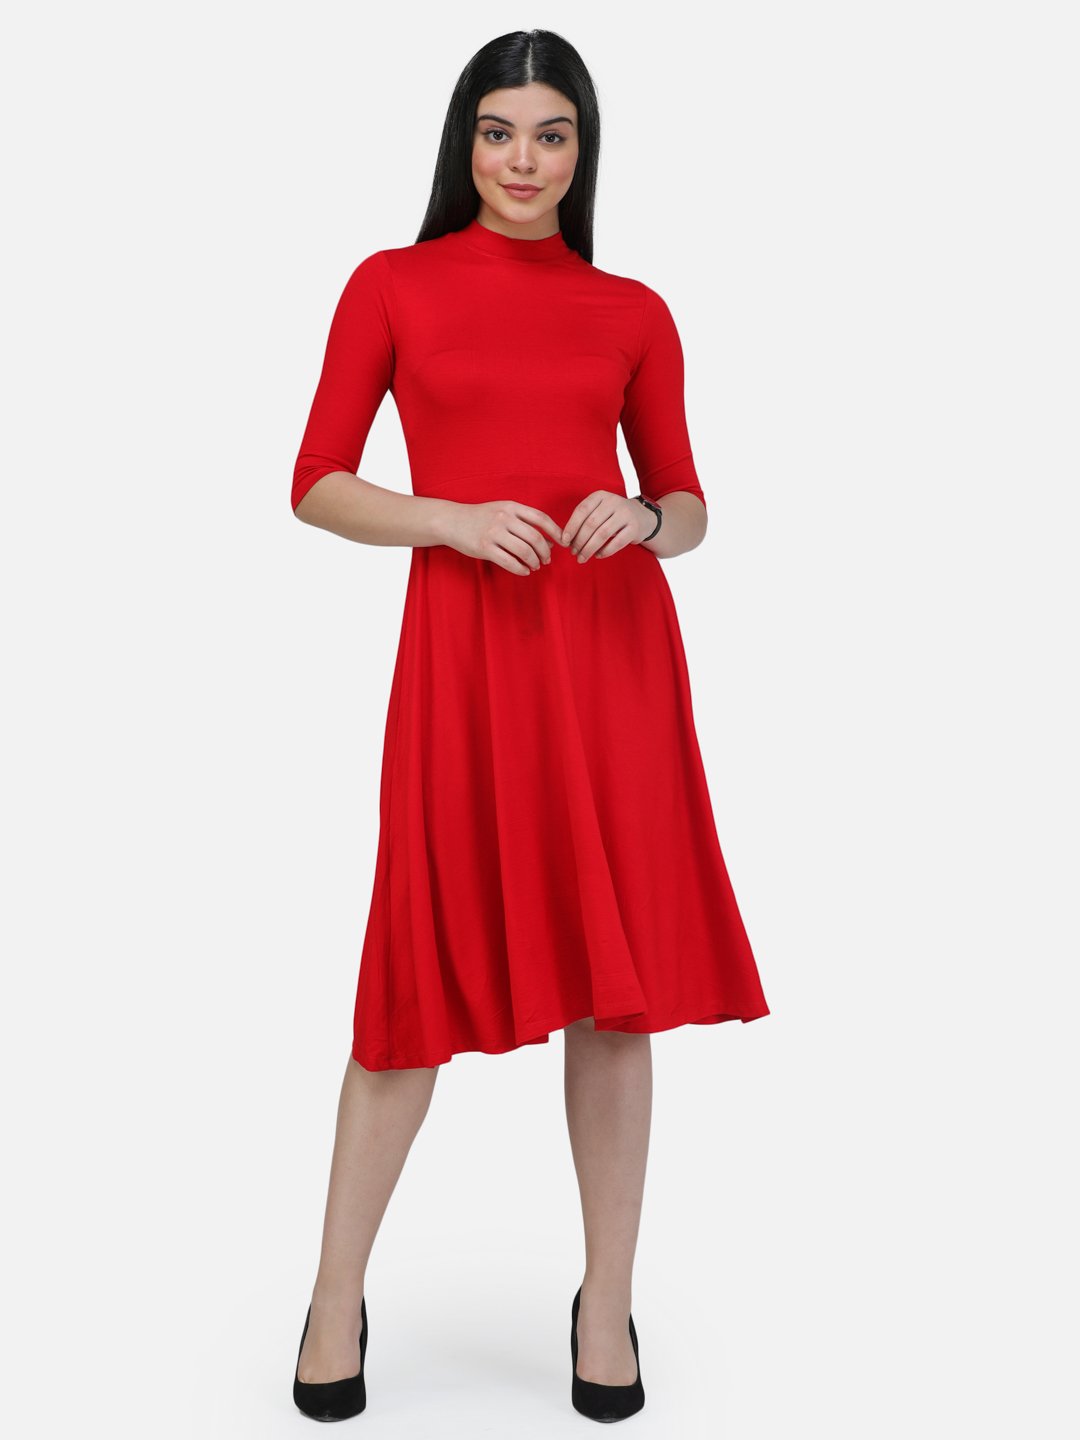 SCORPIUS Solid Red High Neck Dress